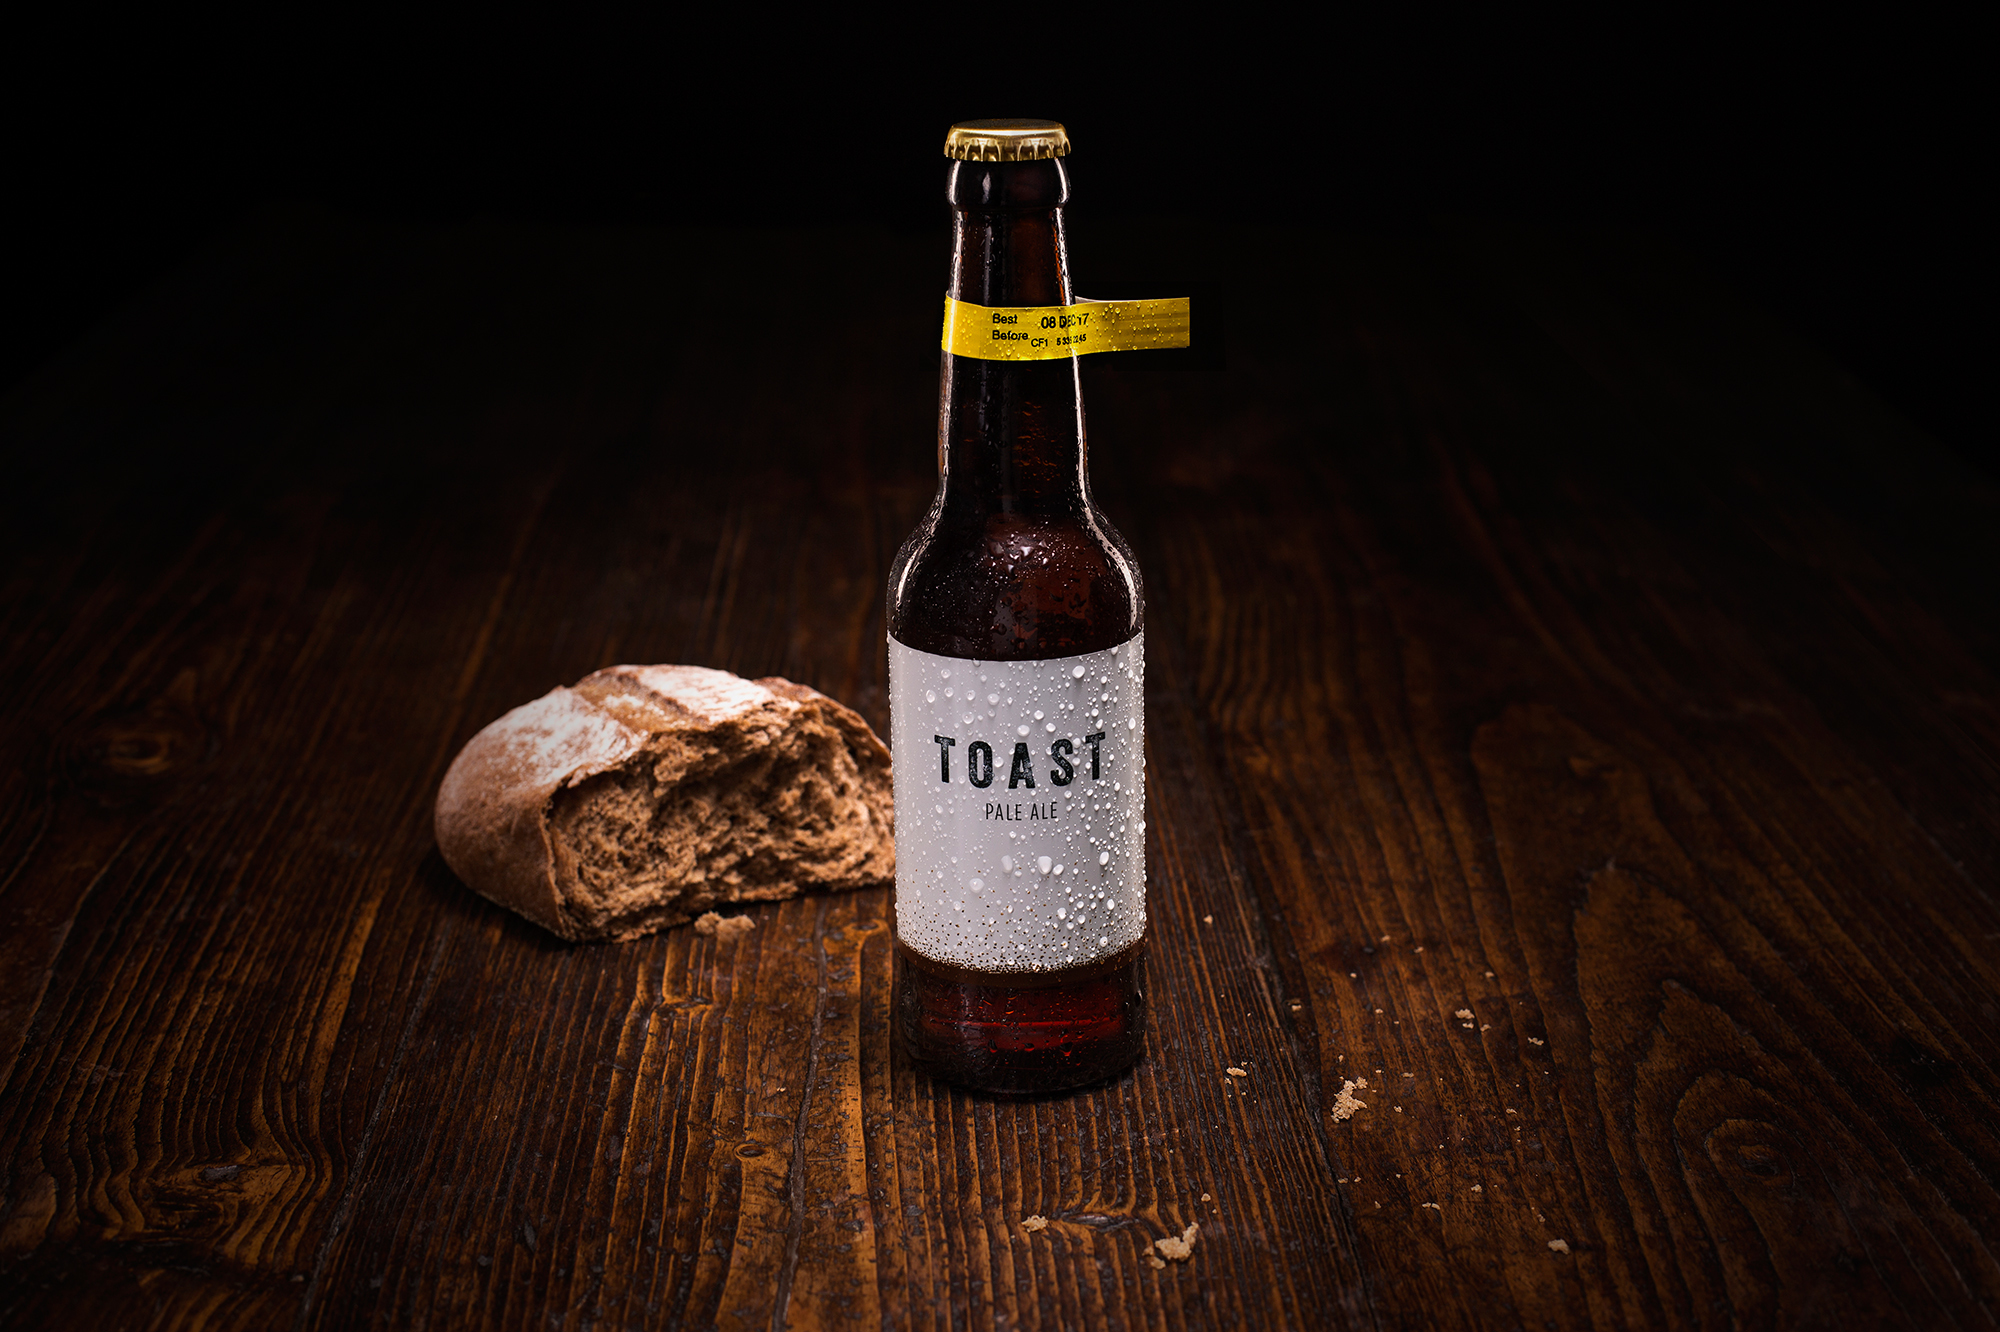 Toast Ale, a London-based company that brews suds from surplus bread, believes it has found an environmentally friendly way to tap into the booming craft beer market.